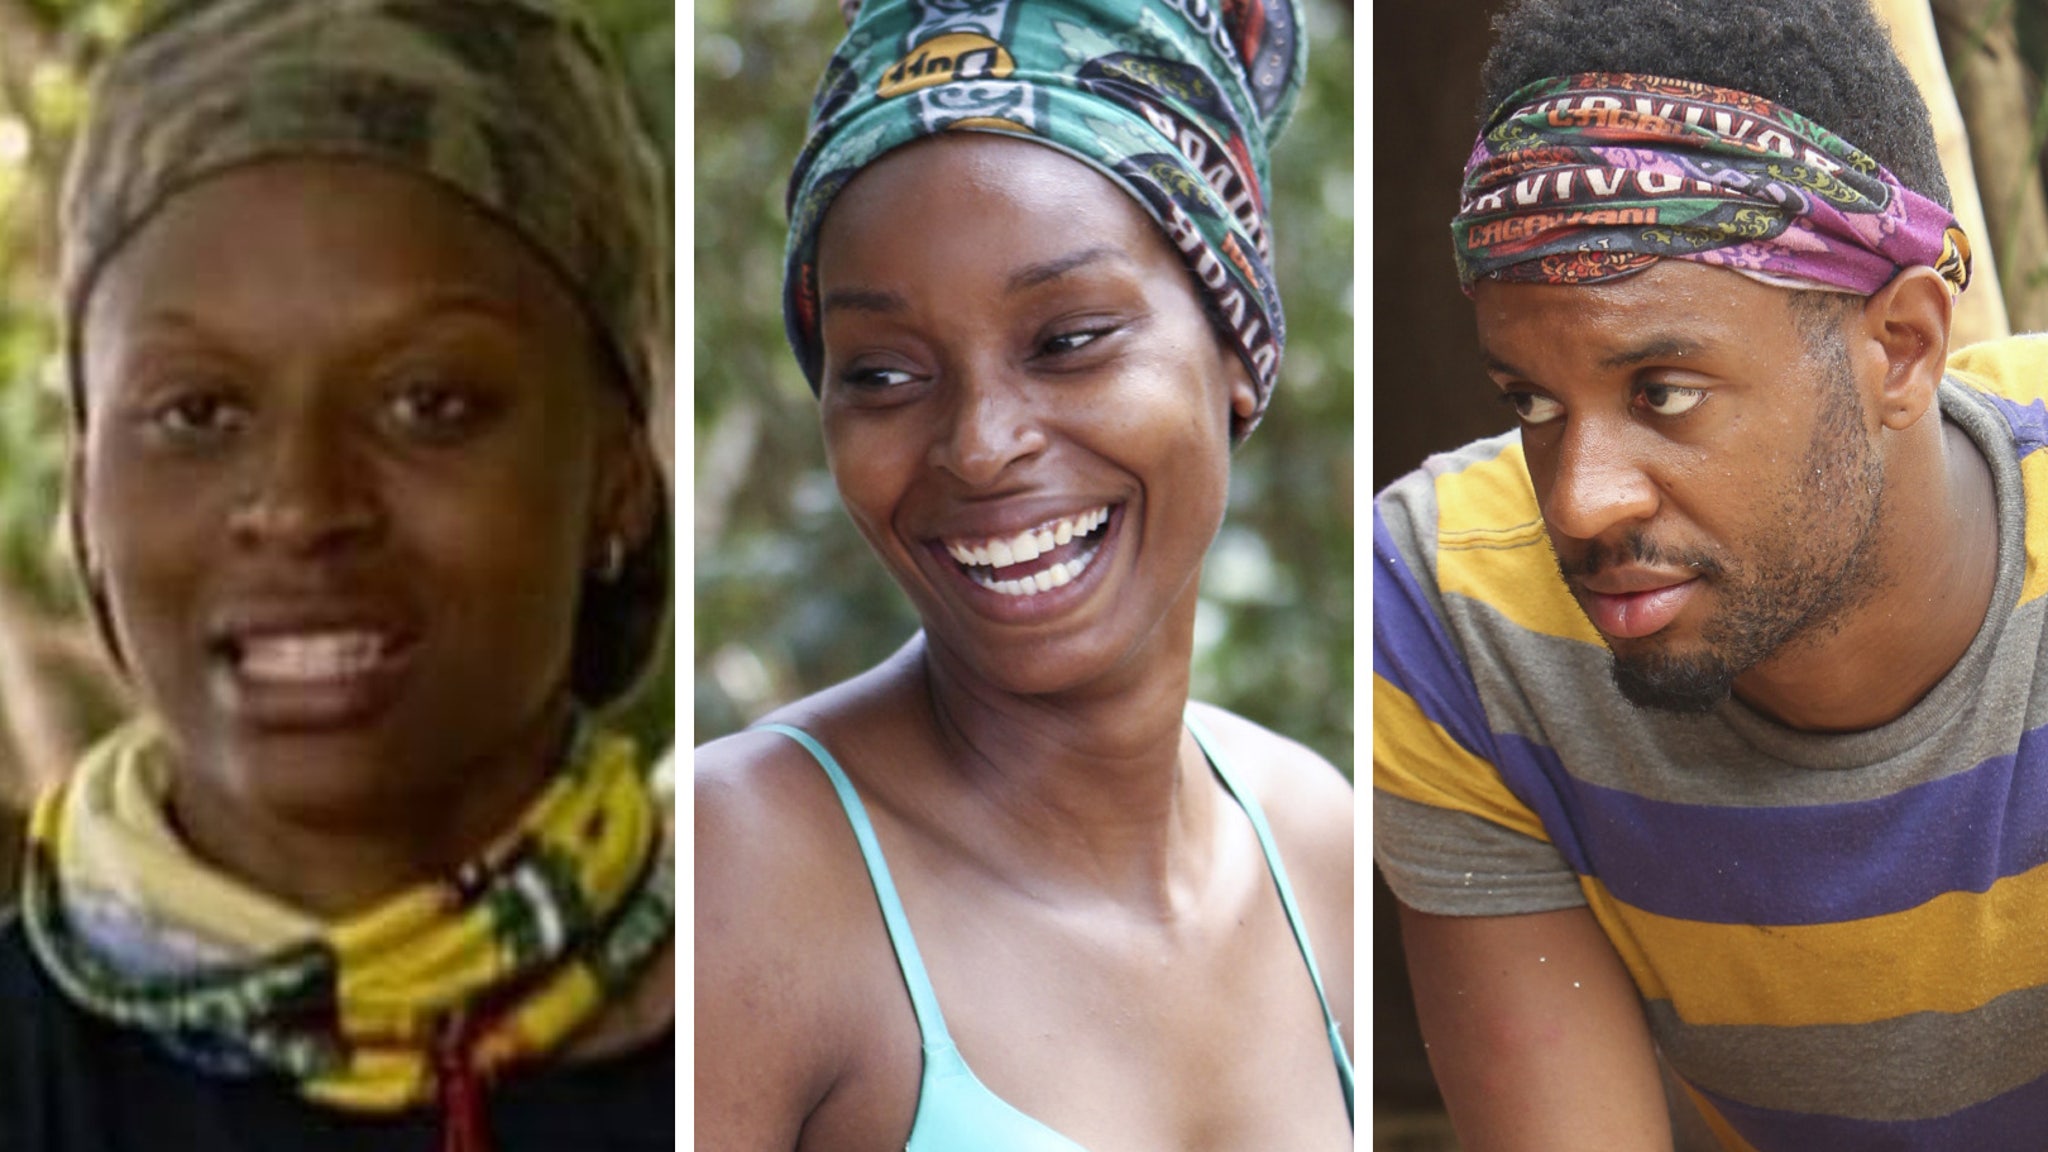 Black Survivor Contestants Say Reality Show Edited Them Into Stereotypes.